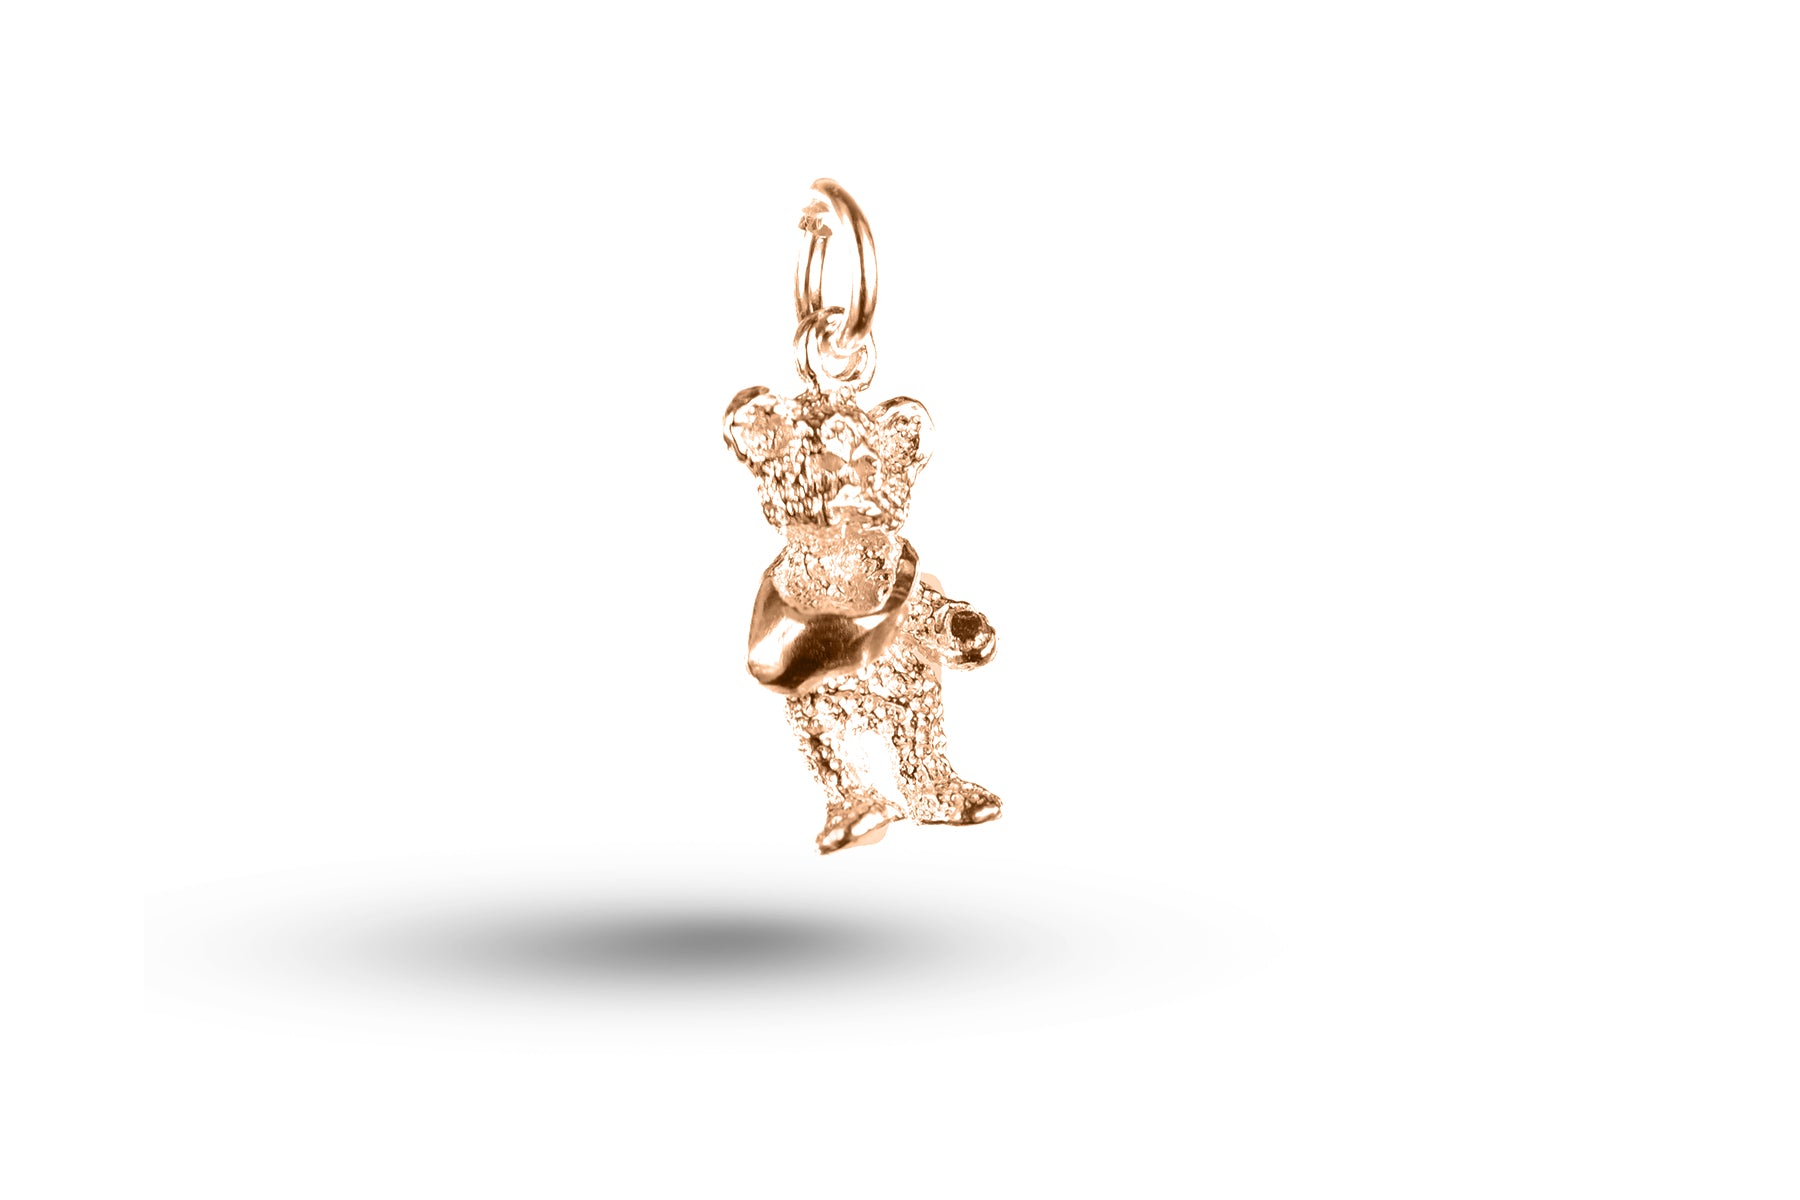 Rose gold Ted with Arm in Sling charm.